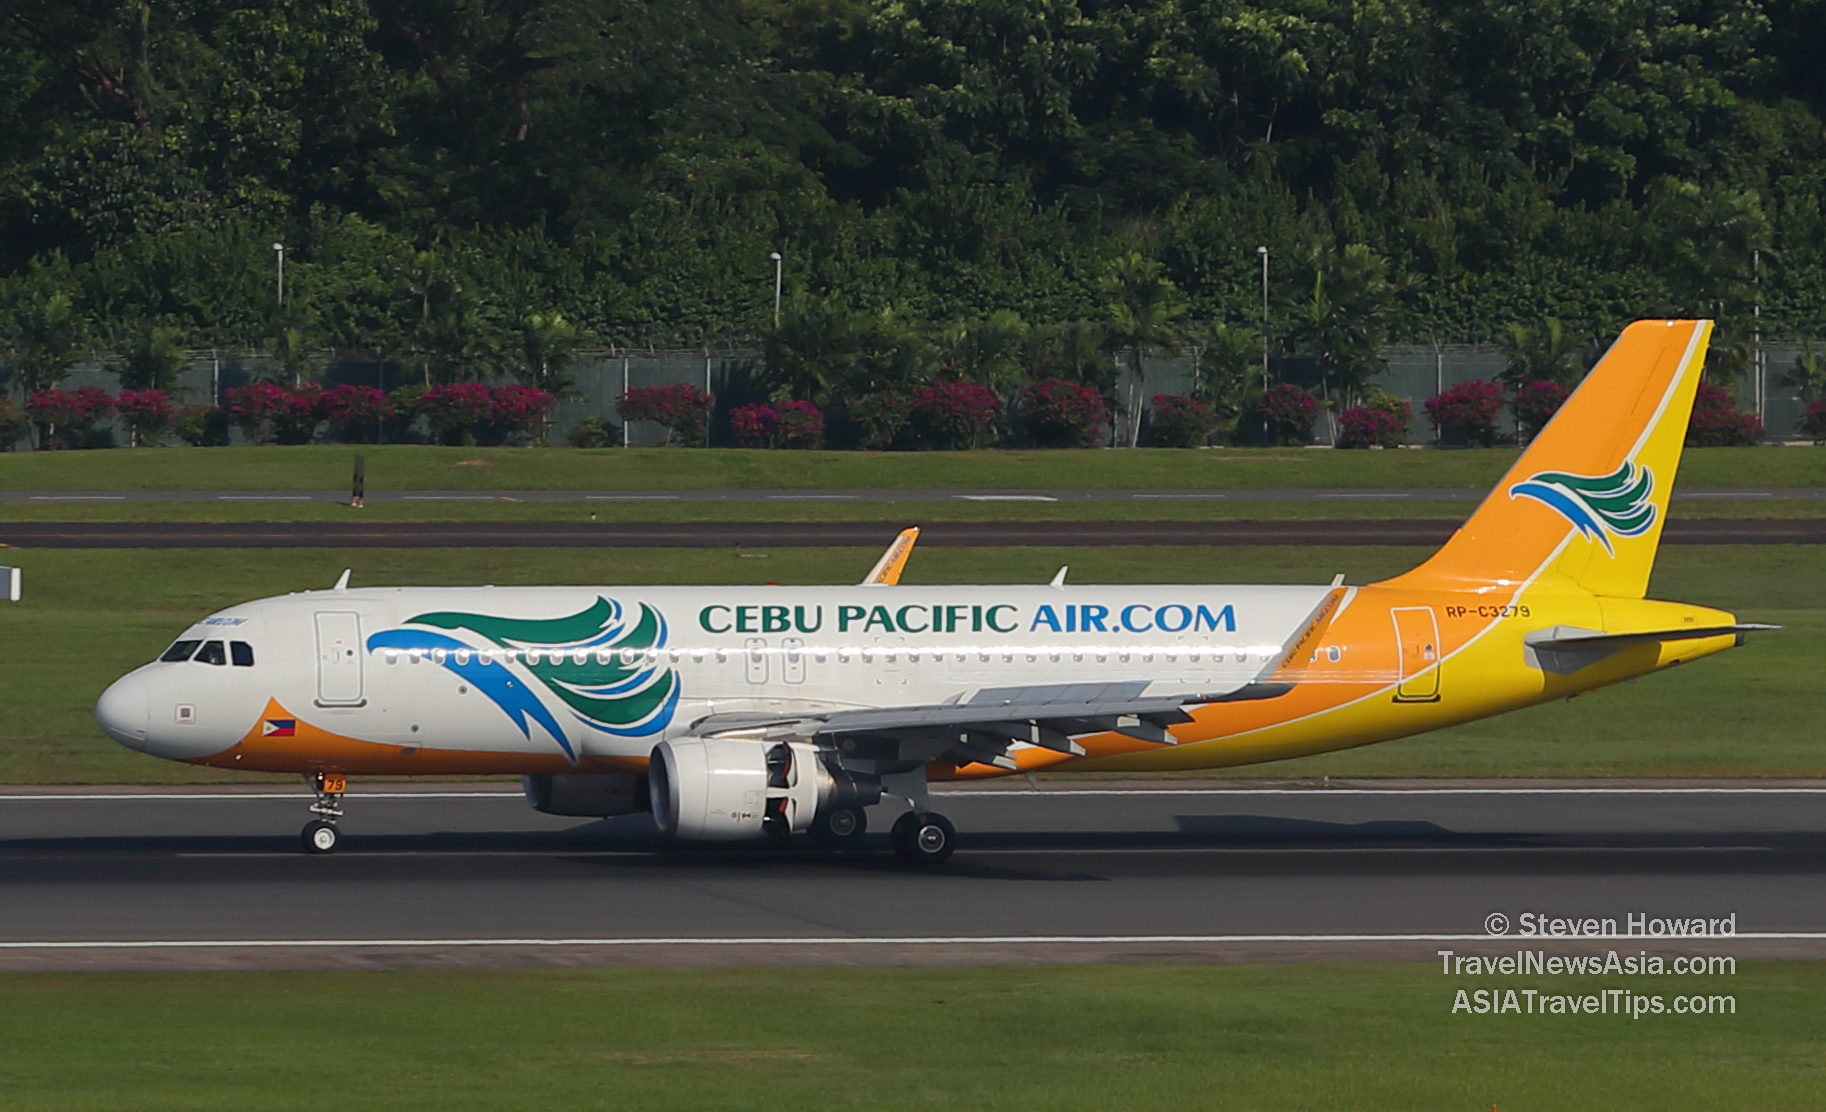 Cebu Pacific Airbus A320 reg: RP-C3279. Picture taken by Steven Howard of TravelNewsAsia.com Click to enlarge.